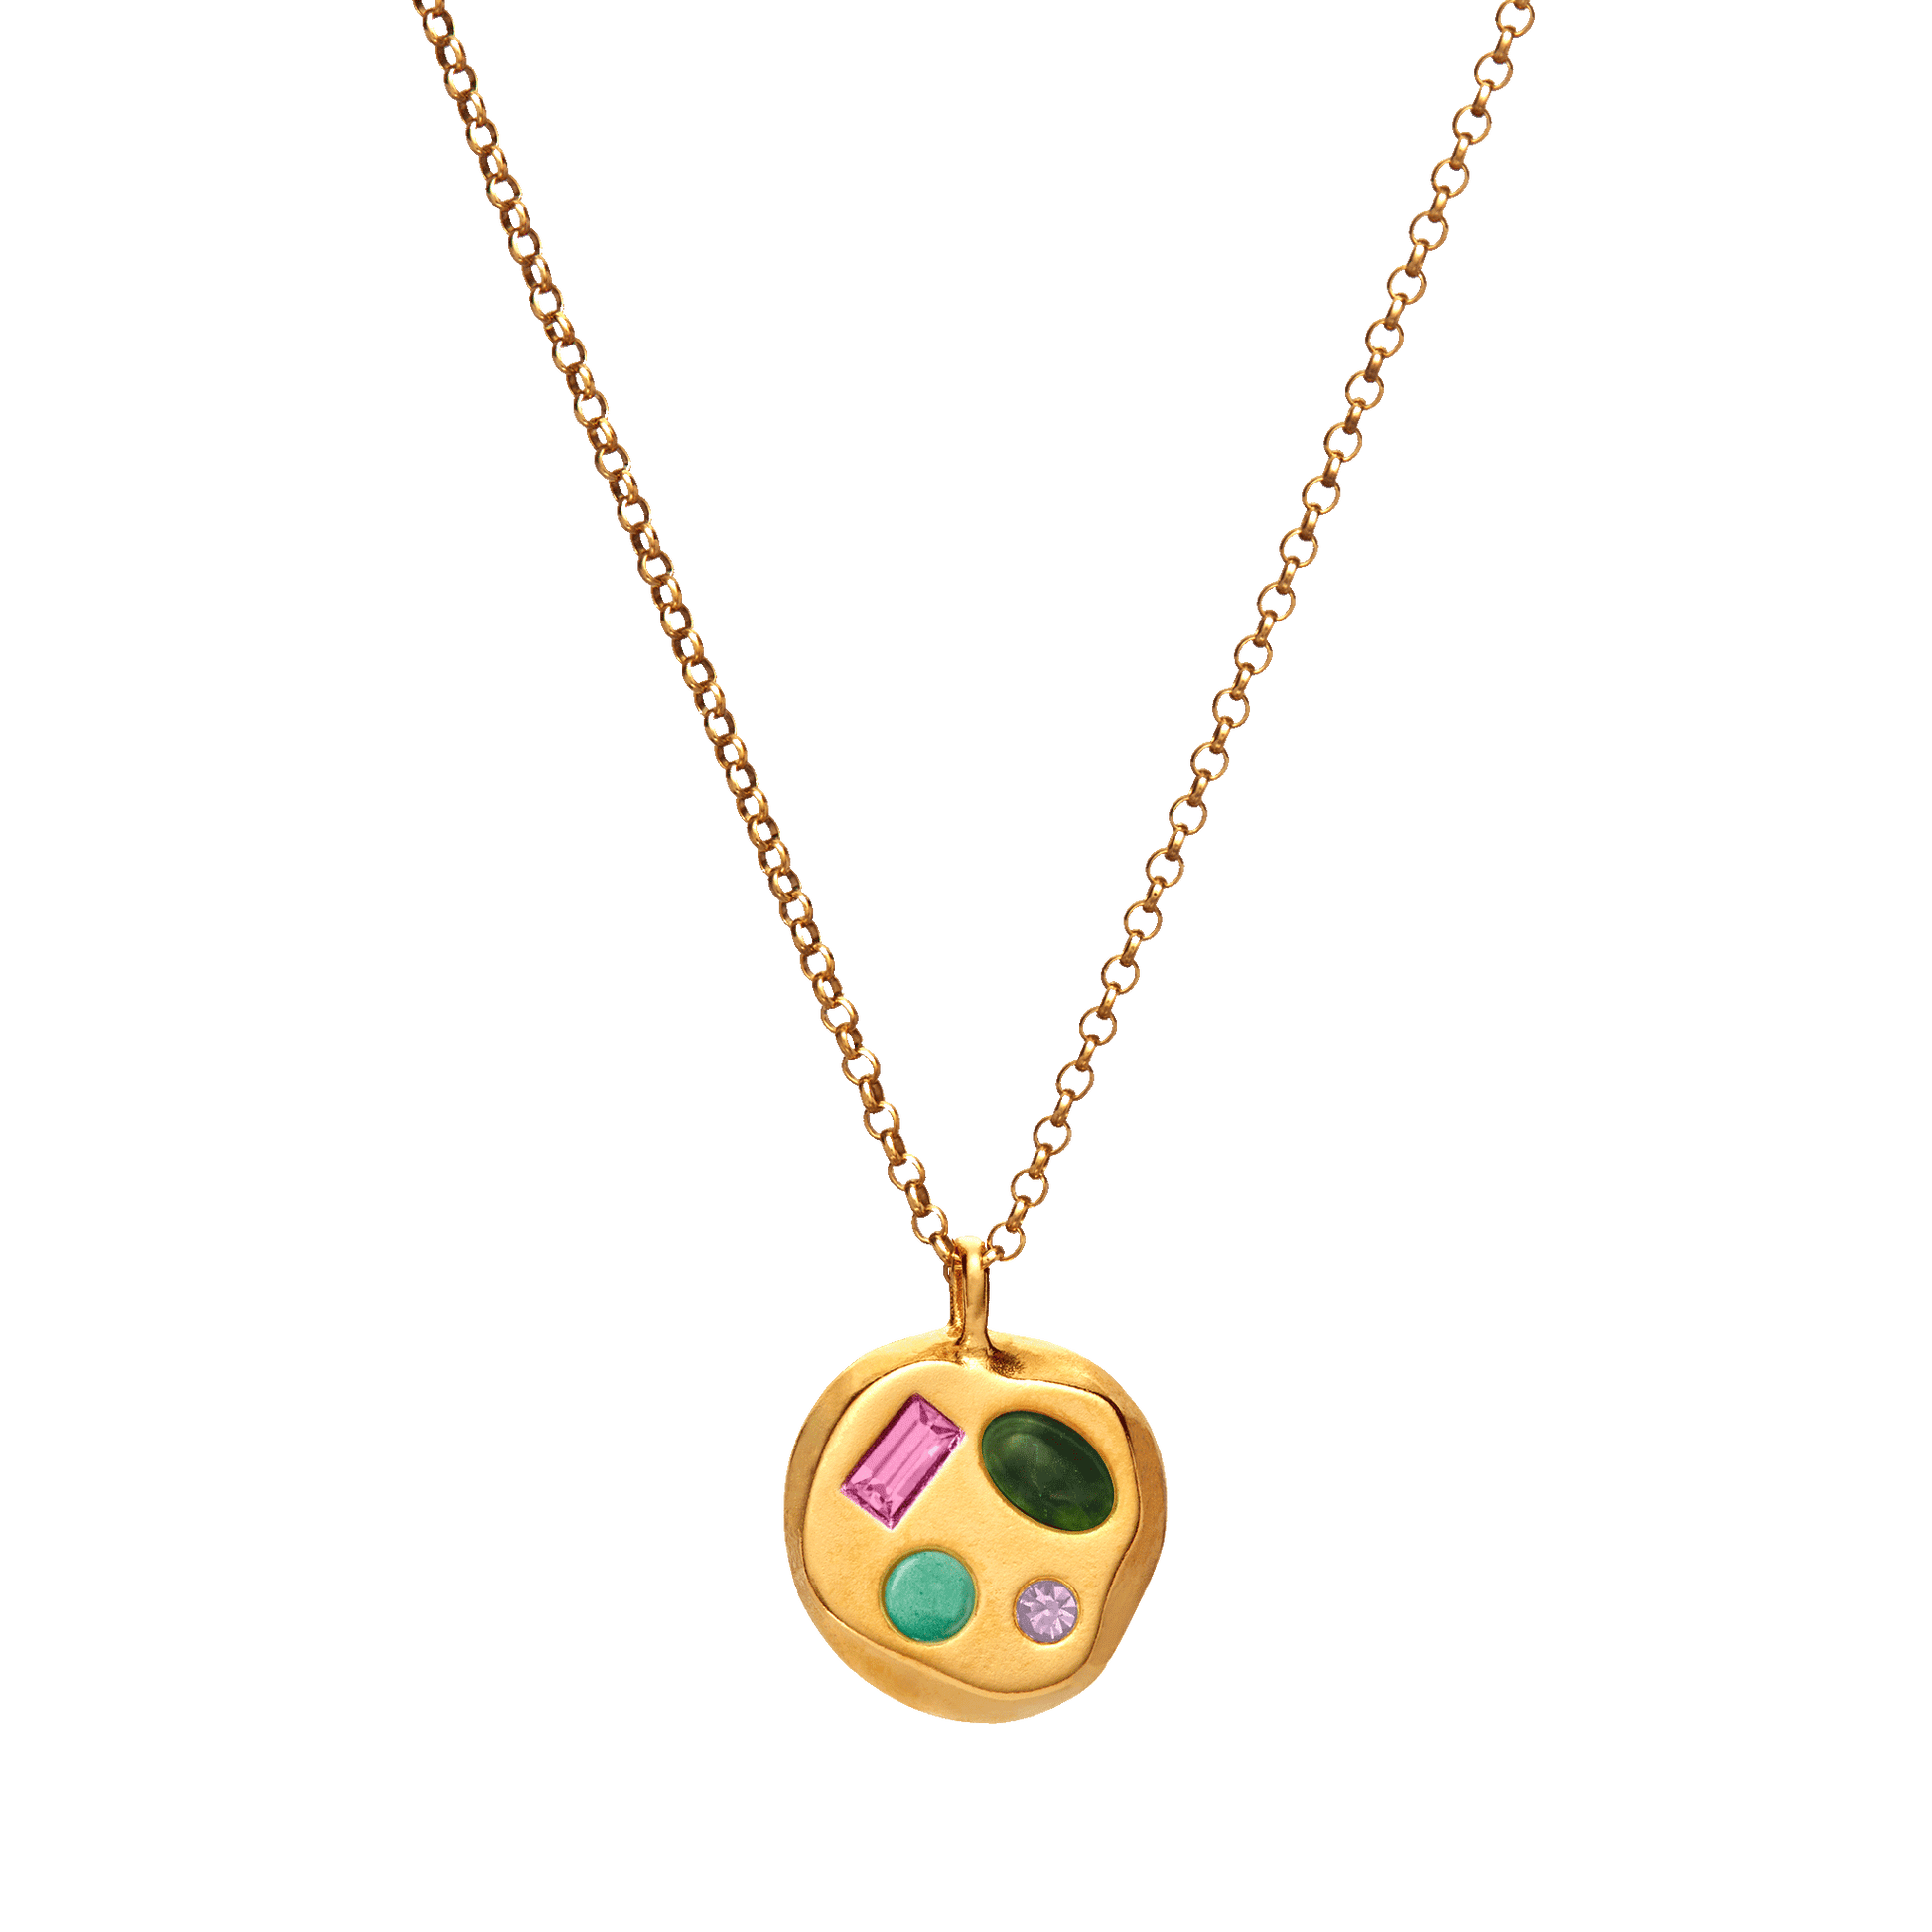 The October Ninth Pendant